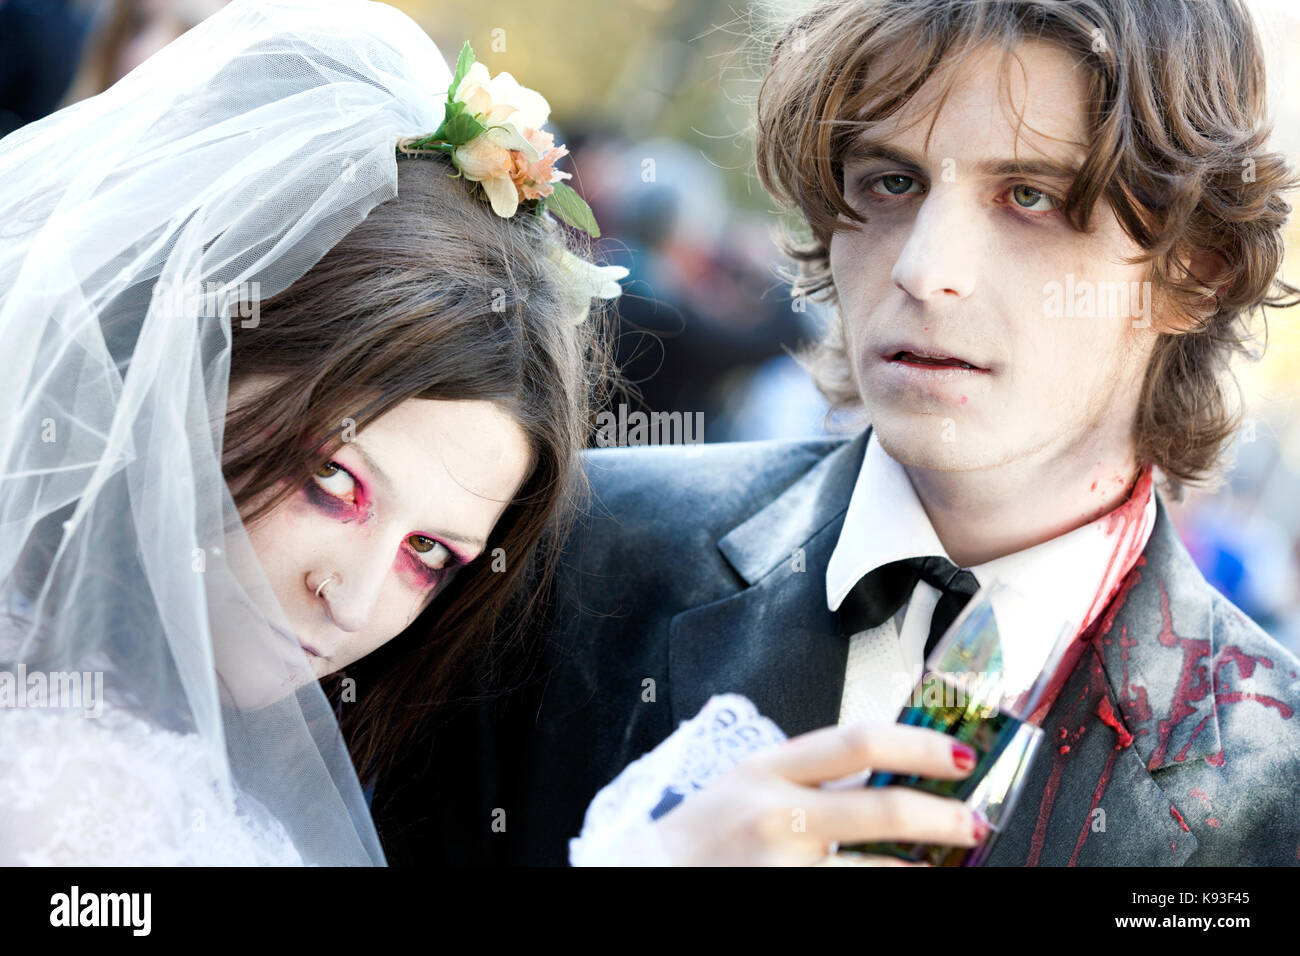 Two people, male and female, dressed as a zombie bride and groom at a zombie wedding Stock Photo